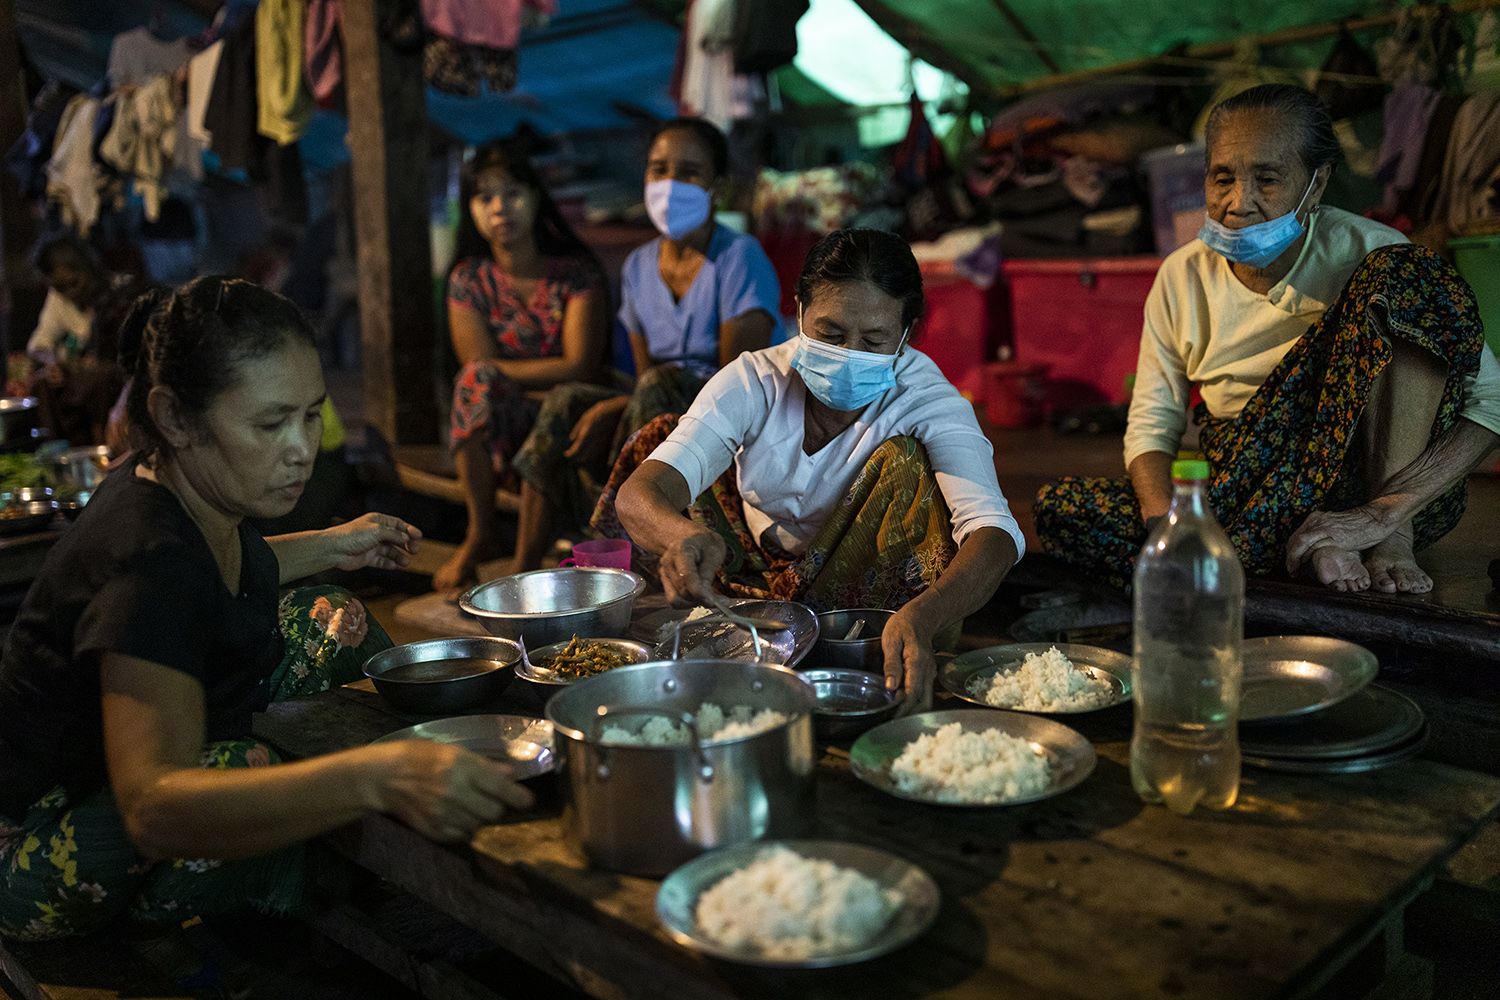 People prepare dinner at the Shitthaung camp for displaced people in Mrauk U, Myanmar, on Aug. 20. International humanitarian access to the township has been largely blocked since early 2019, and many camps are run by local civil society organizations and community volunteers. Image by Hkun Lat/Foreign Policy. Myanmar, 2020. 